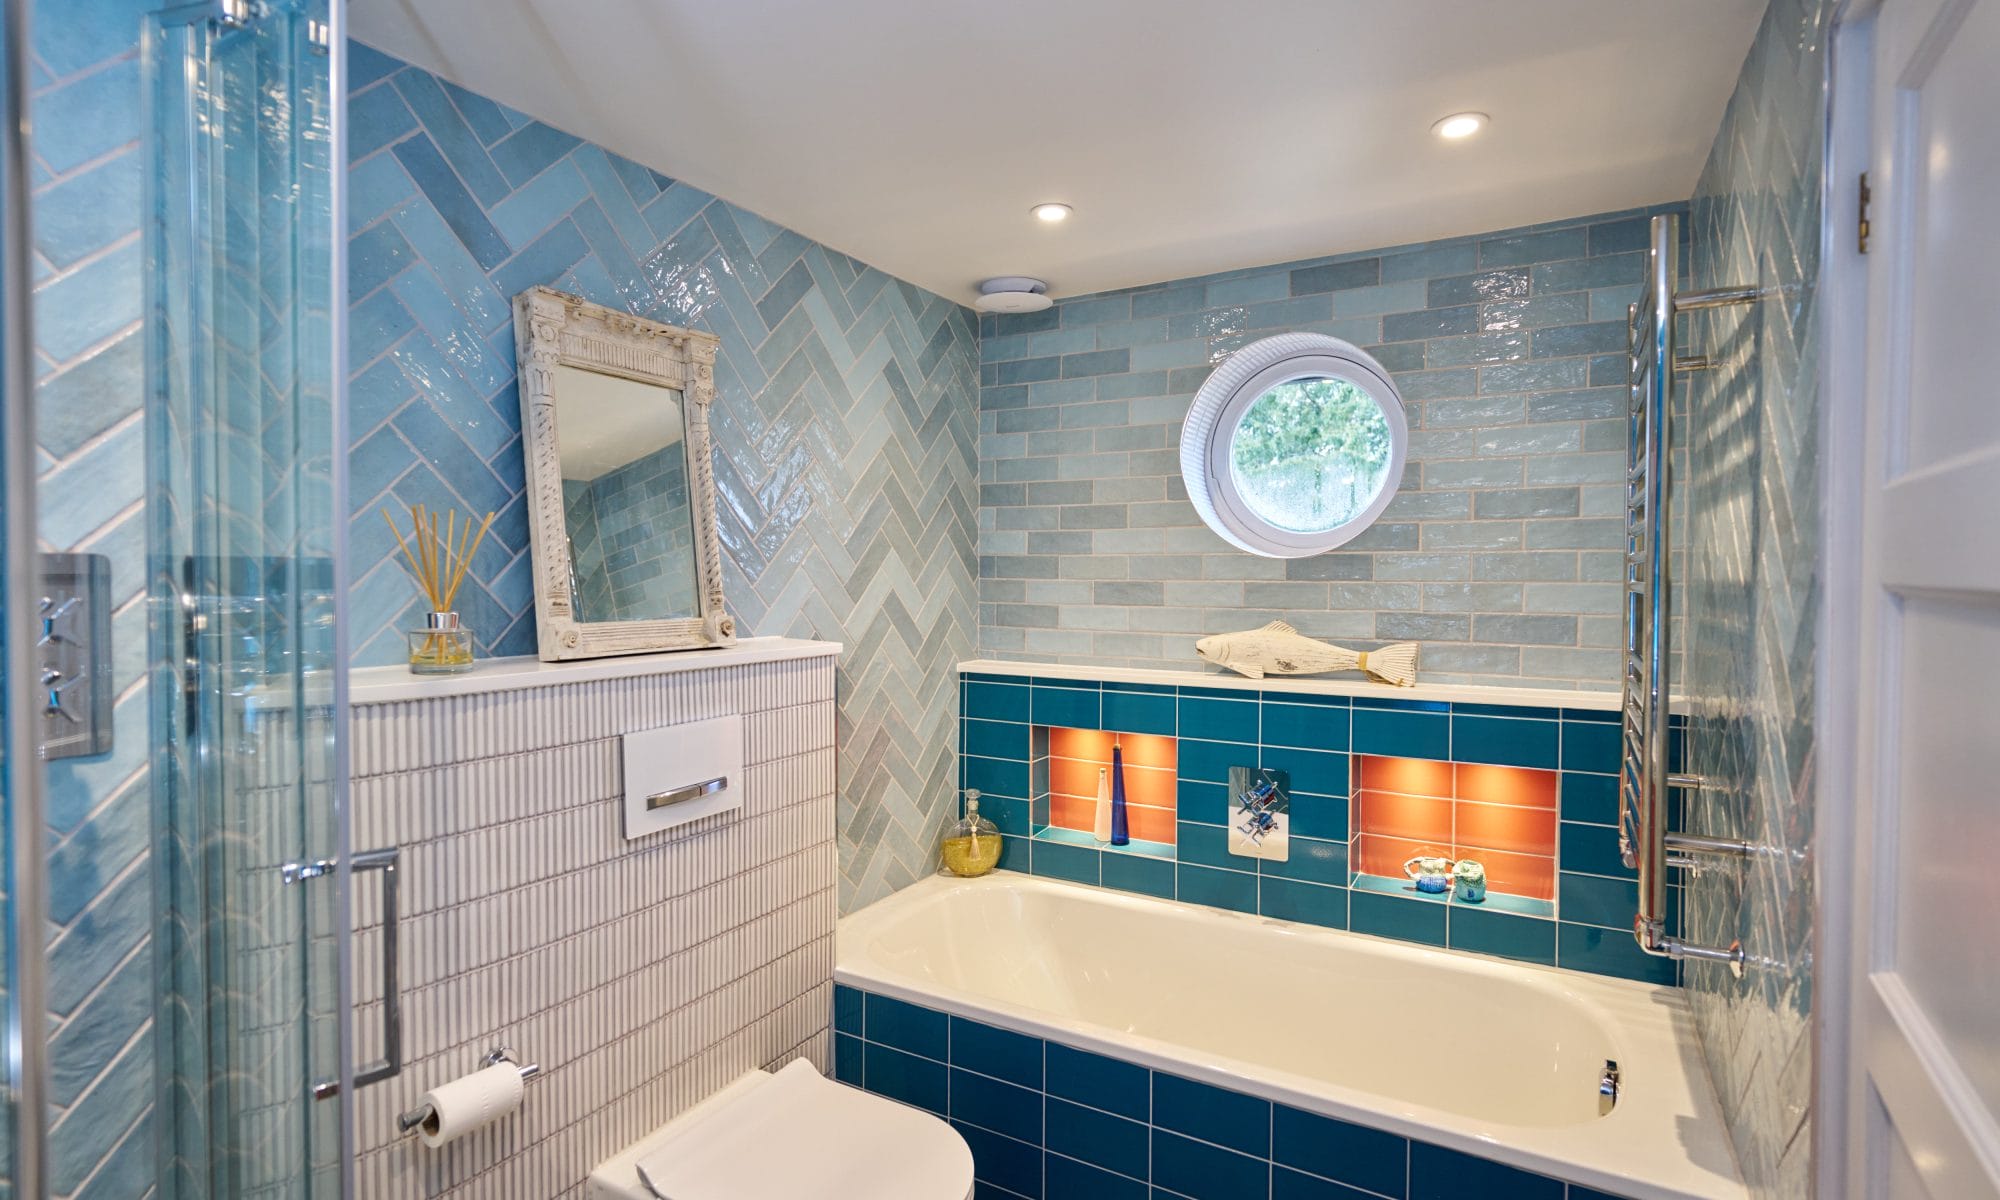 Bathroom Design in Handcross with Blue and Red Tiles